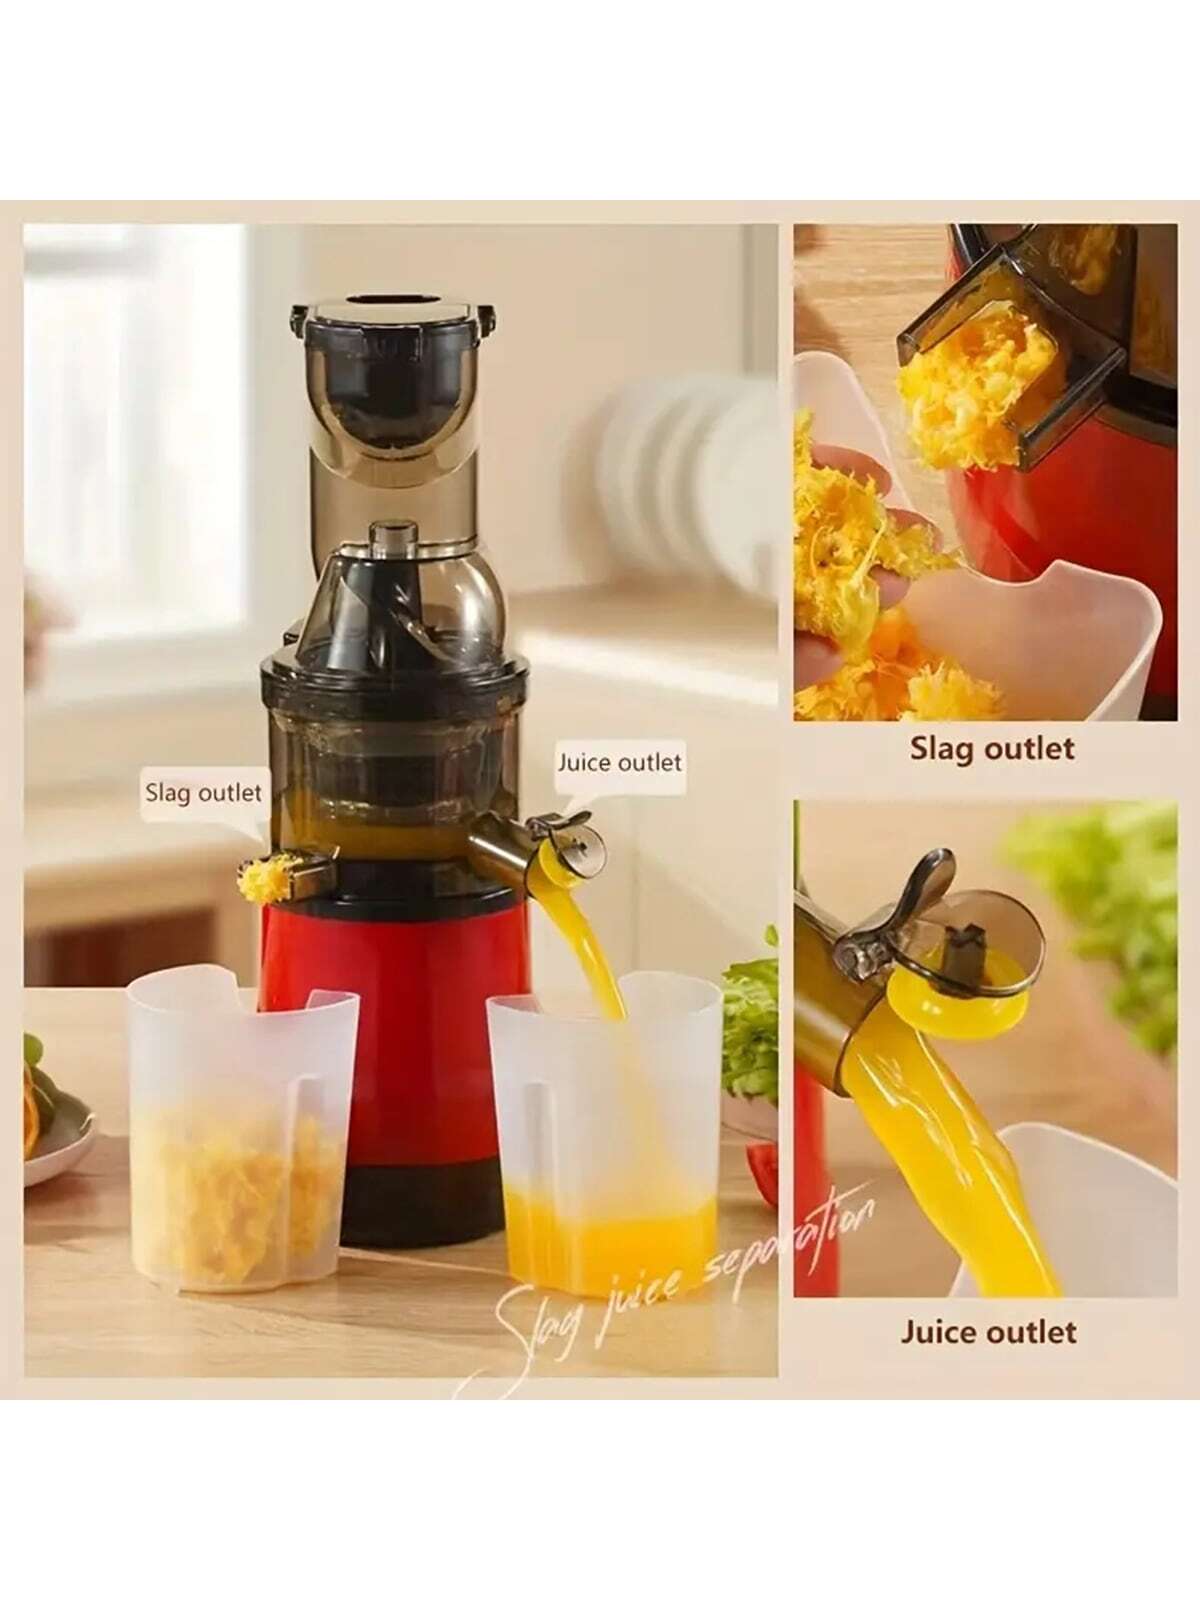 US/EU Plug Slow Juicer, Matte Black Juicer Machine, Slow Juicer Cold Press With 5.1in/14cm Wide Feed Chute, Vegetable And Fruit, Juicer Machine For Home Use With Brush, Easy To Clean, With Juice Cap Coarse Strainer, Tofu Press-Red-4